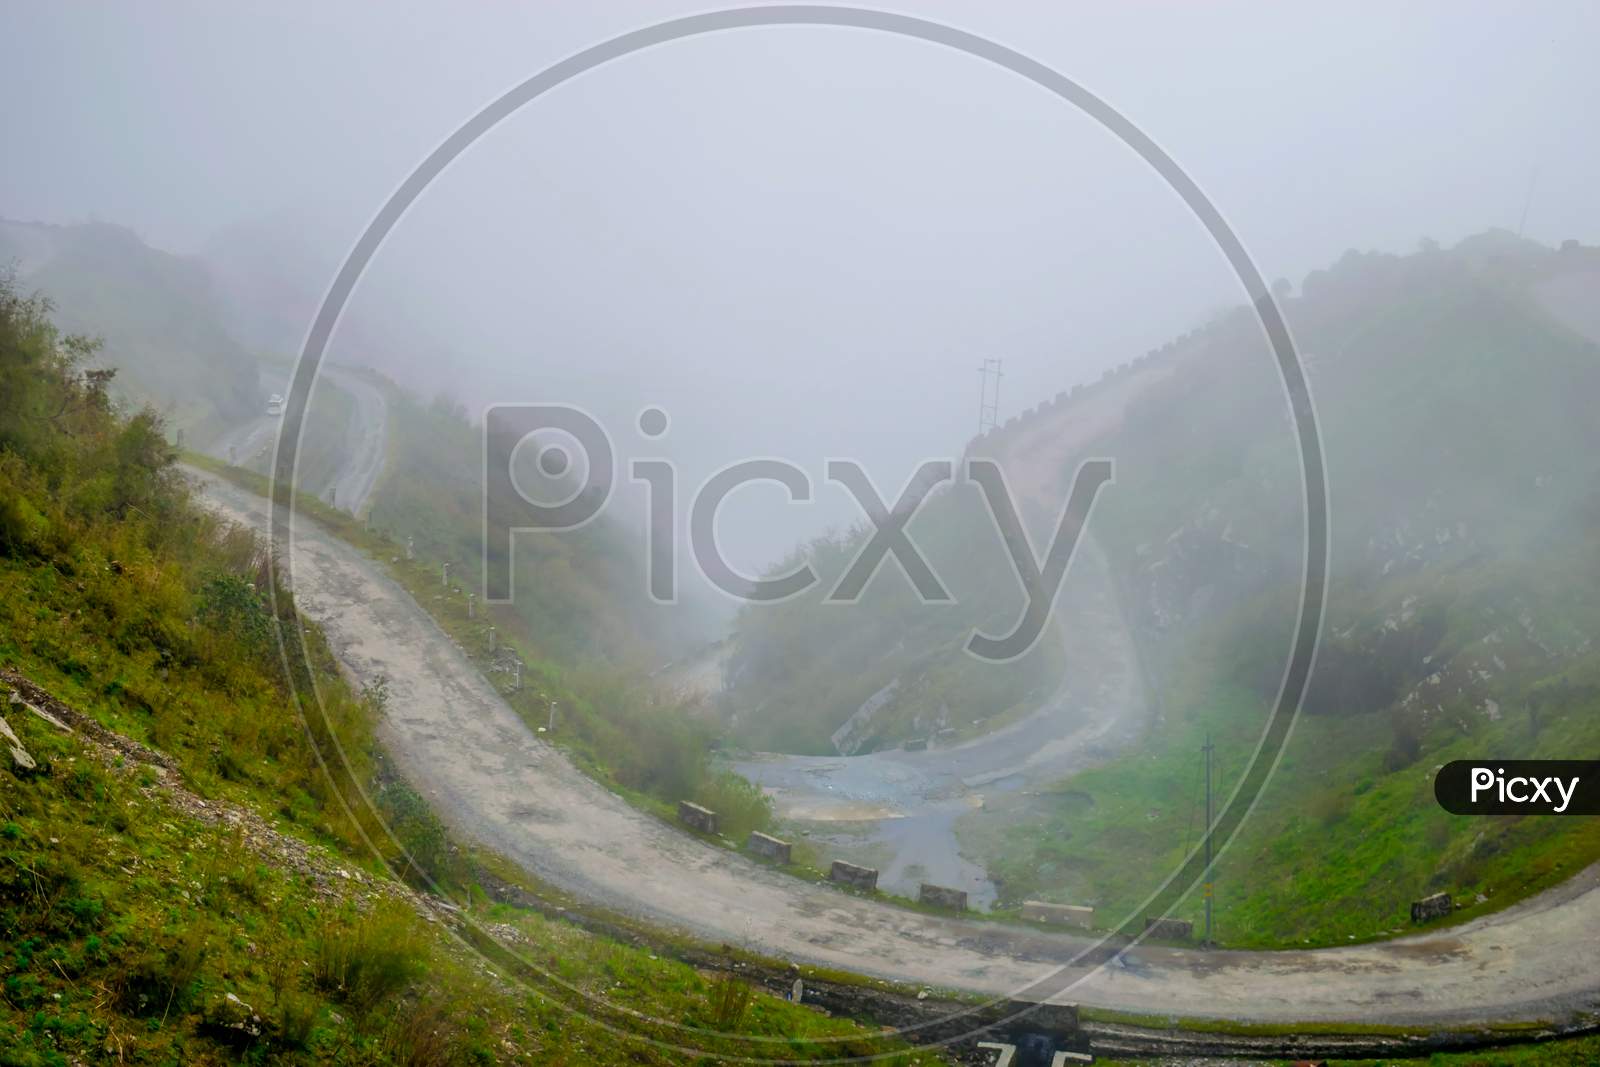 A zigzag road in the Himalayan mountains of Sikkim surrounded by clouds.